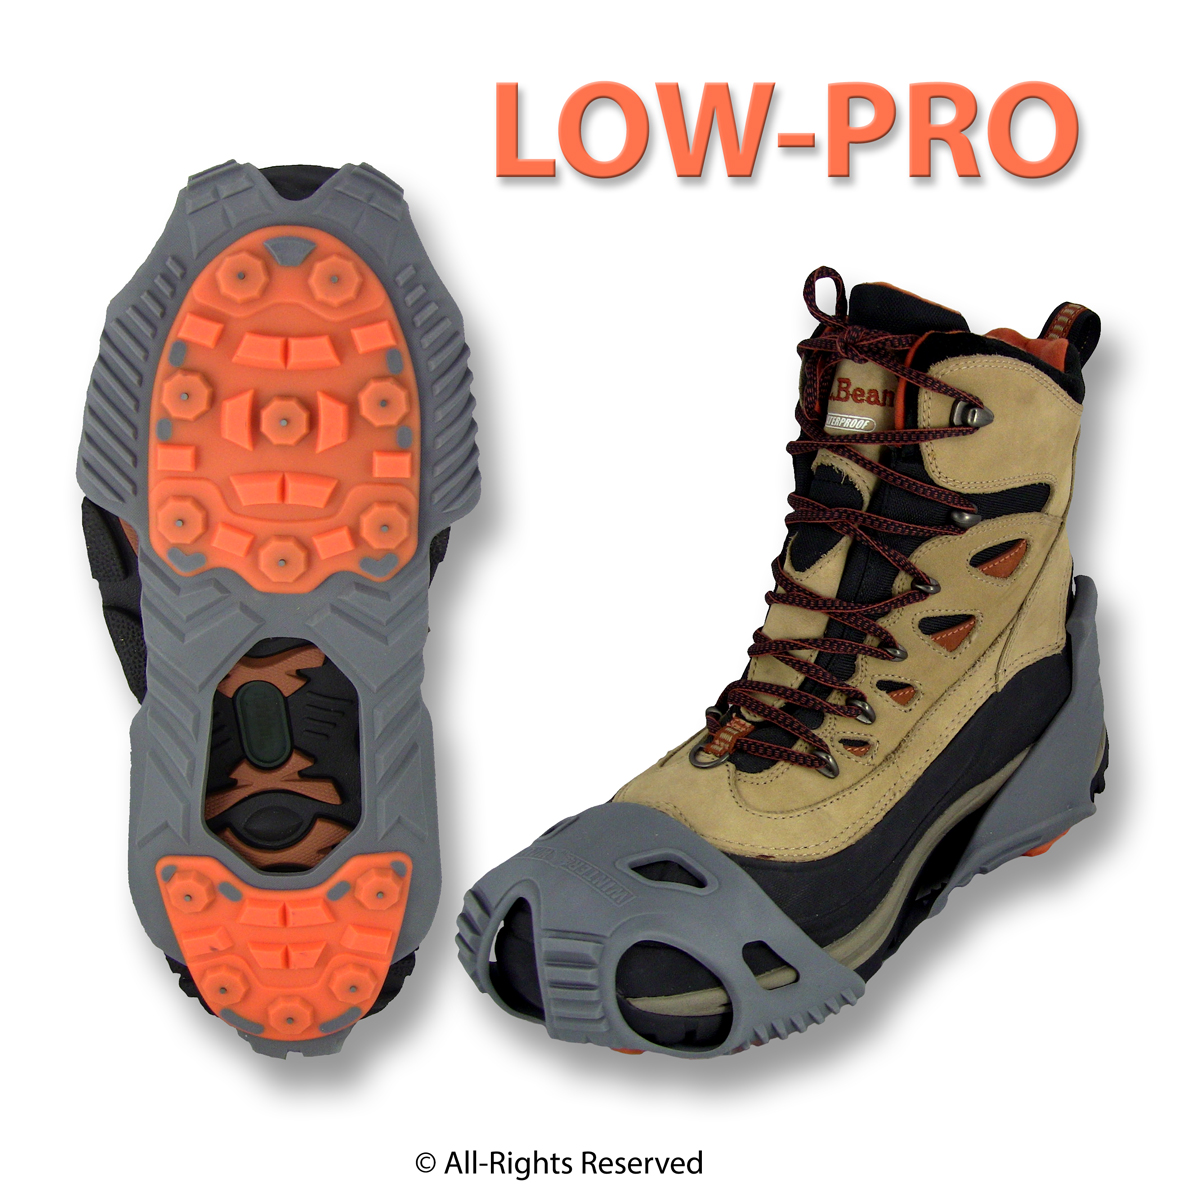 Winter Walking LOW-PRO Ice Cleats for Shoes and Boots